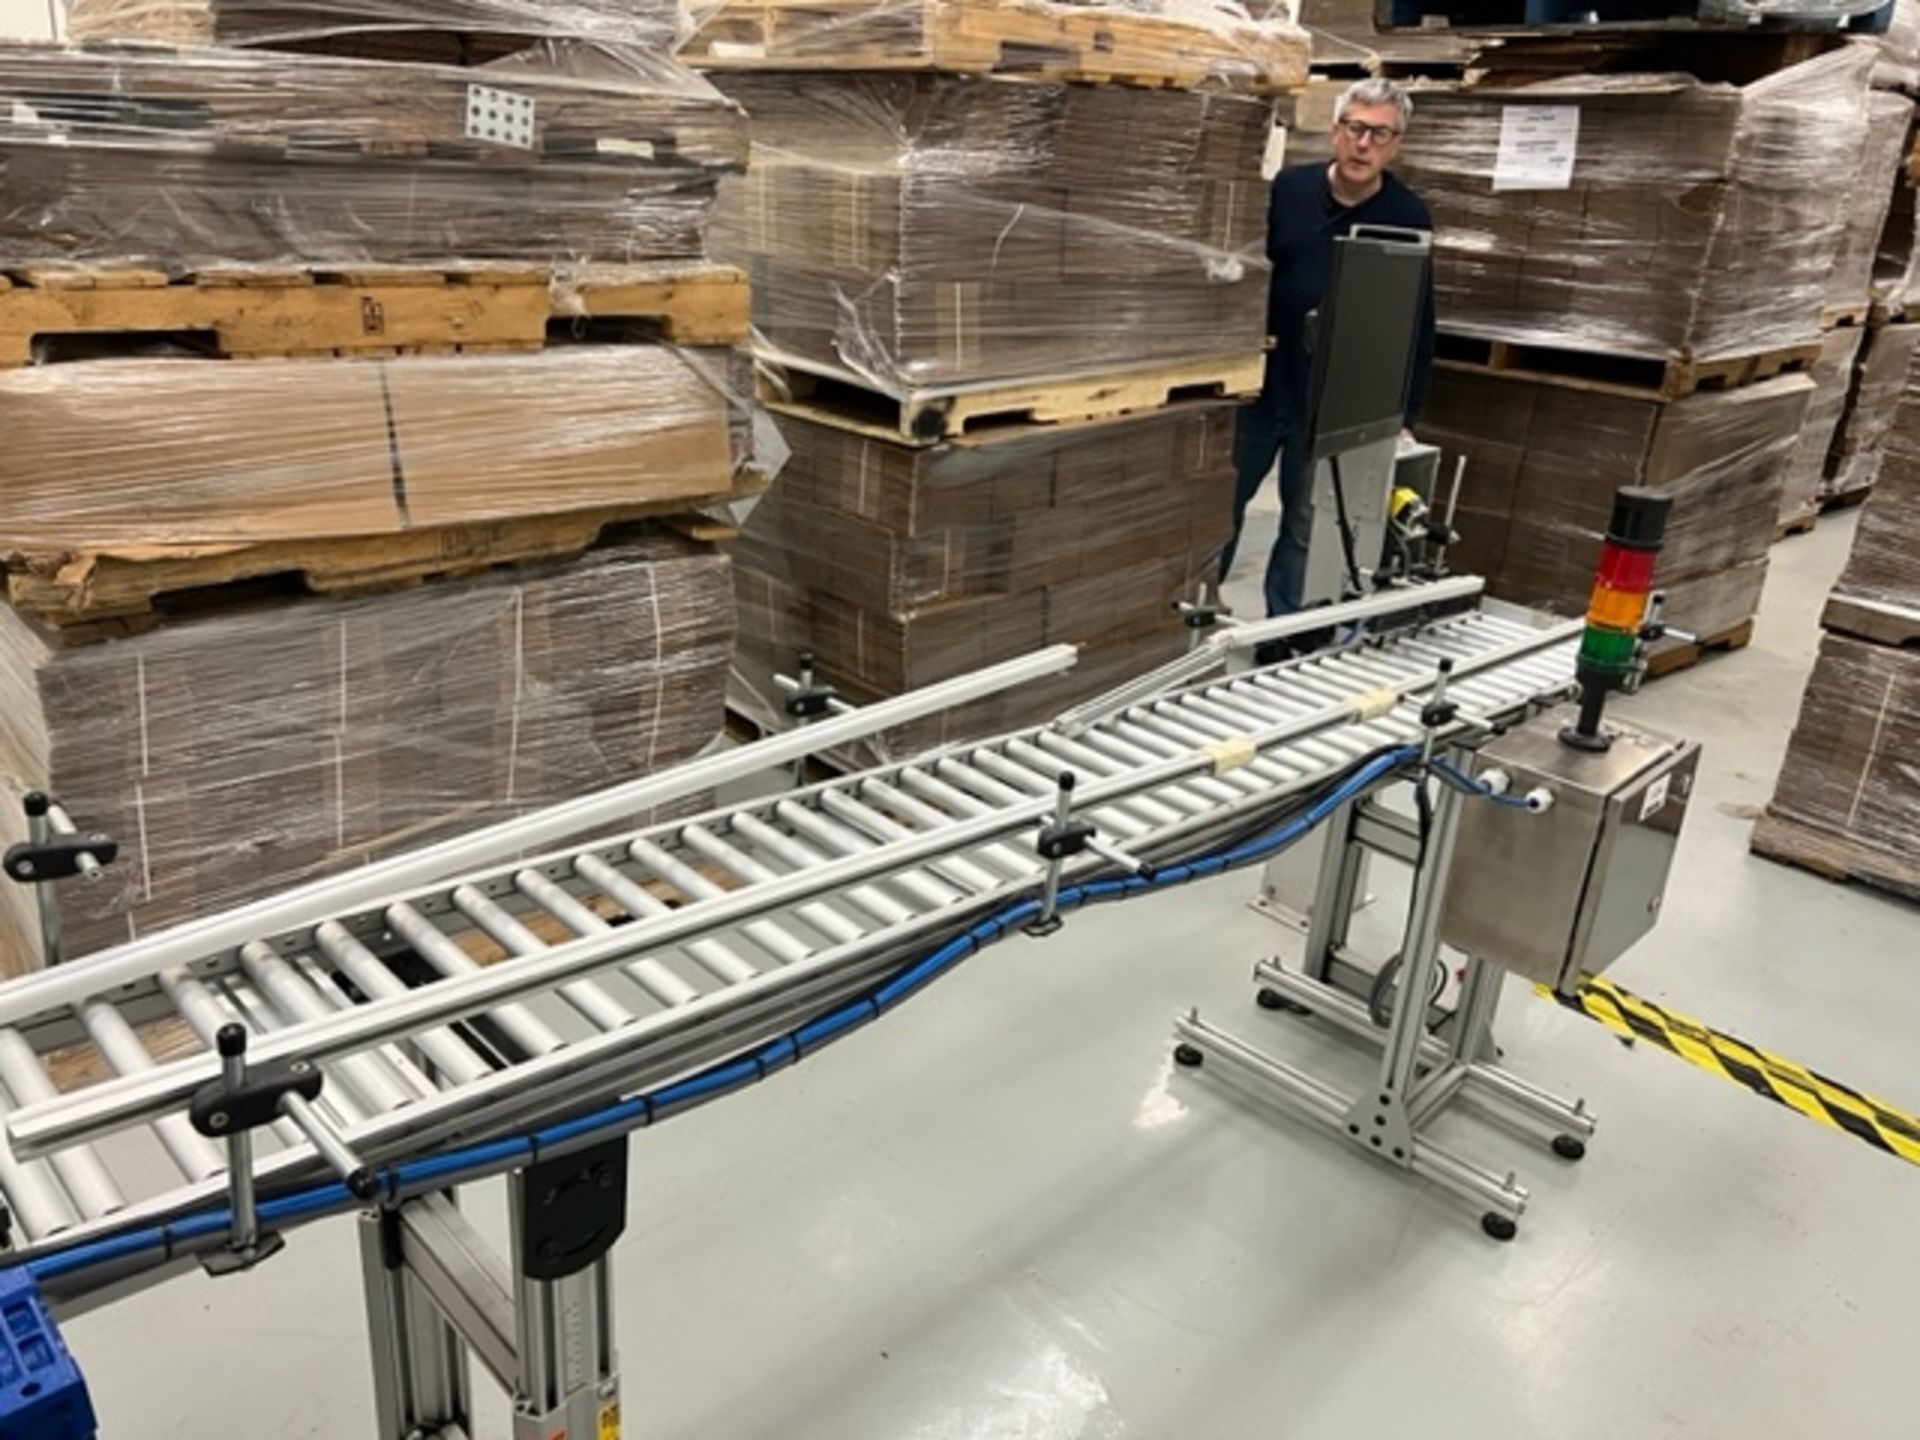 Asset 124 - Roller conveyor 10" wide x 8-ft long. $345.00 Rigged and packed on 48" x 40" pallet - Image 2 of 3